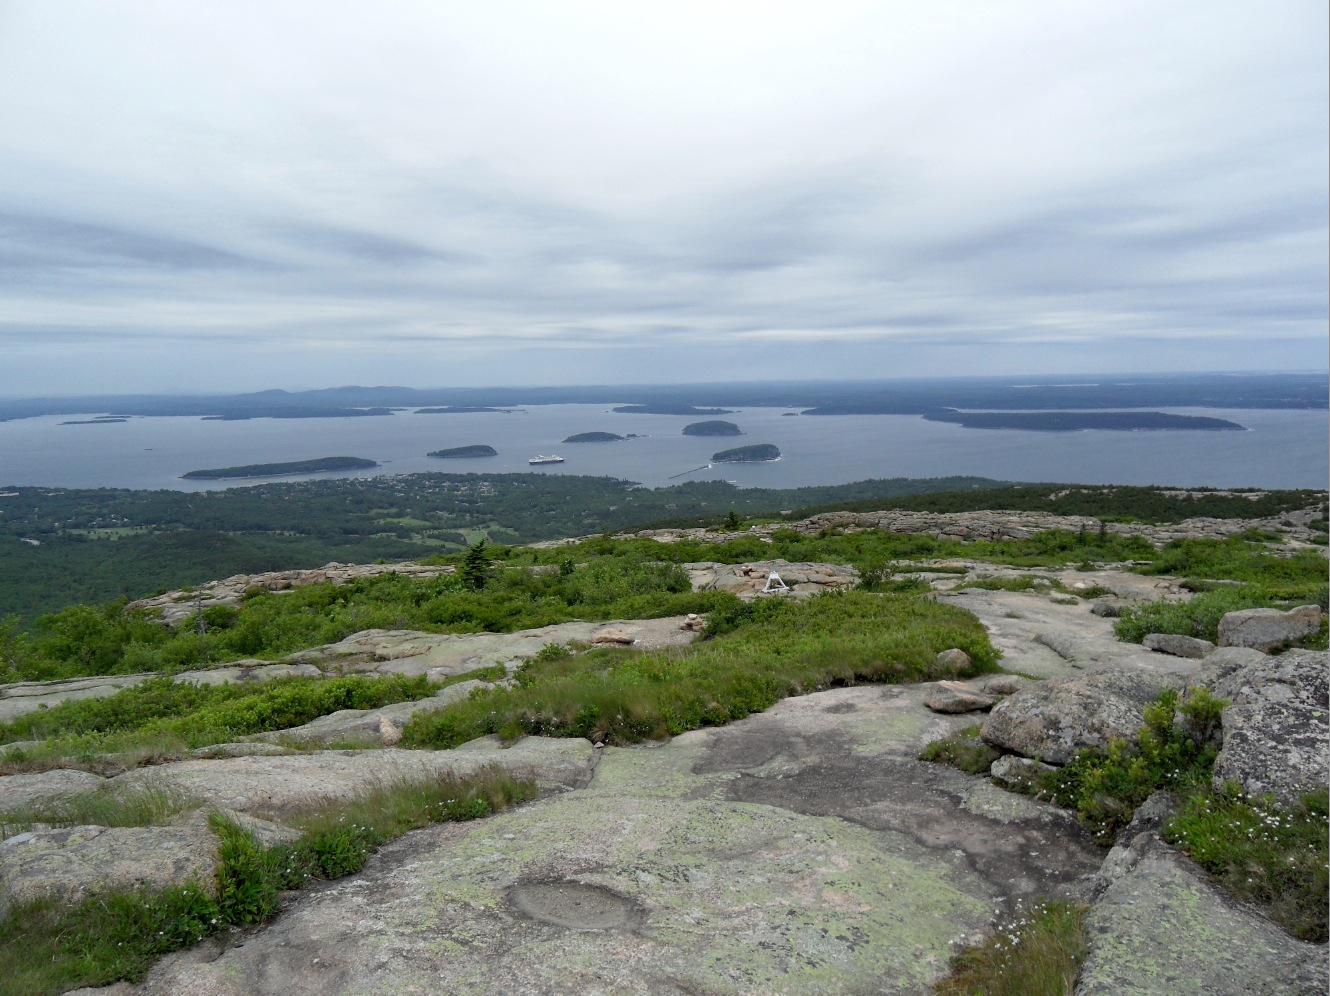 View of Bar Harbor from top of Cadillac mountain